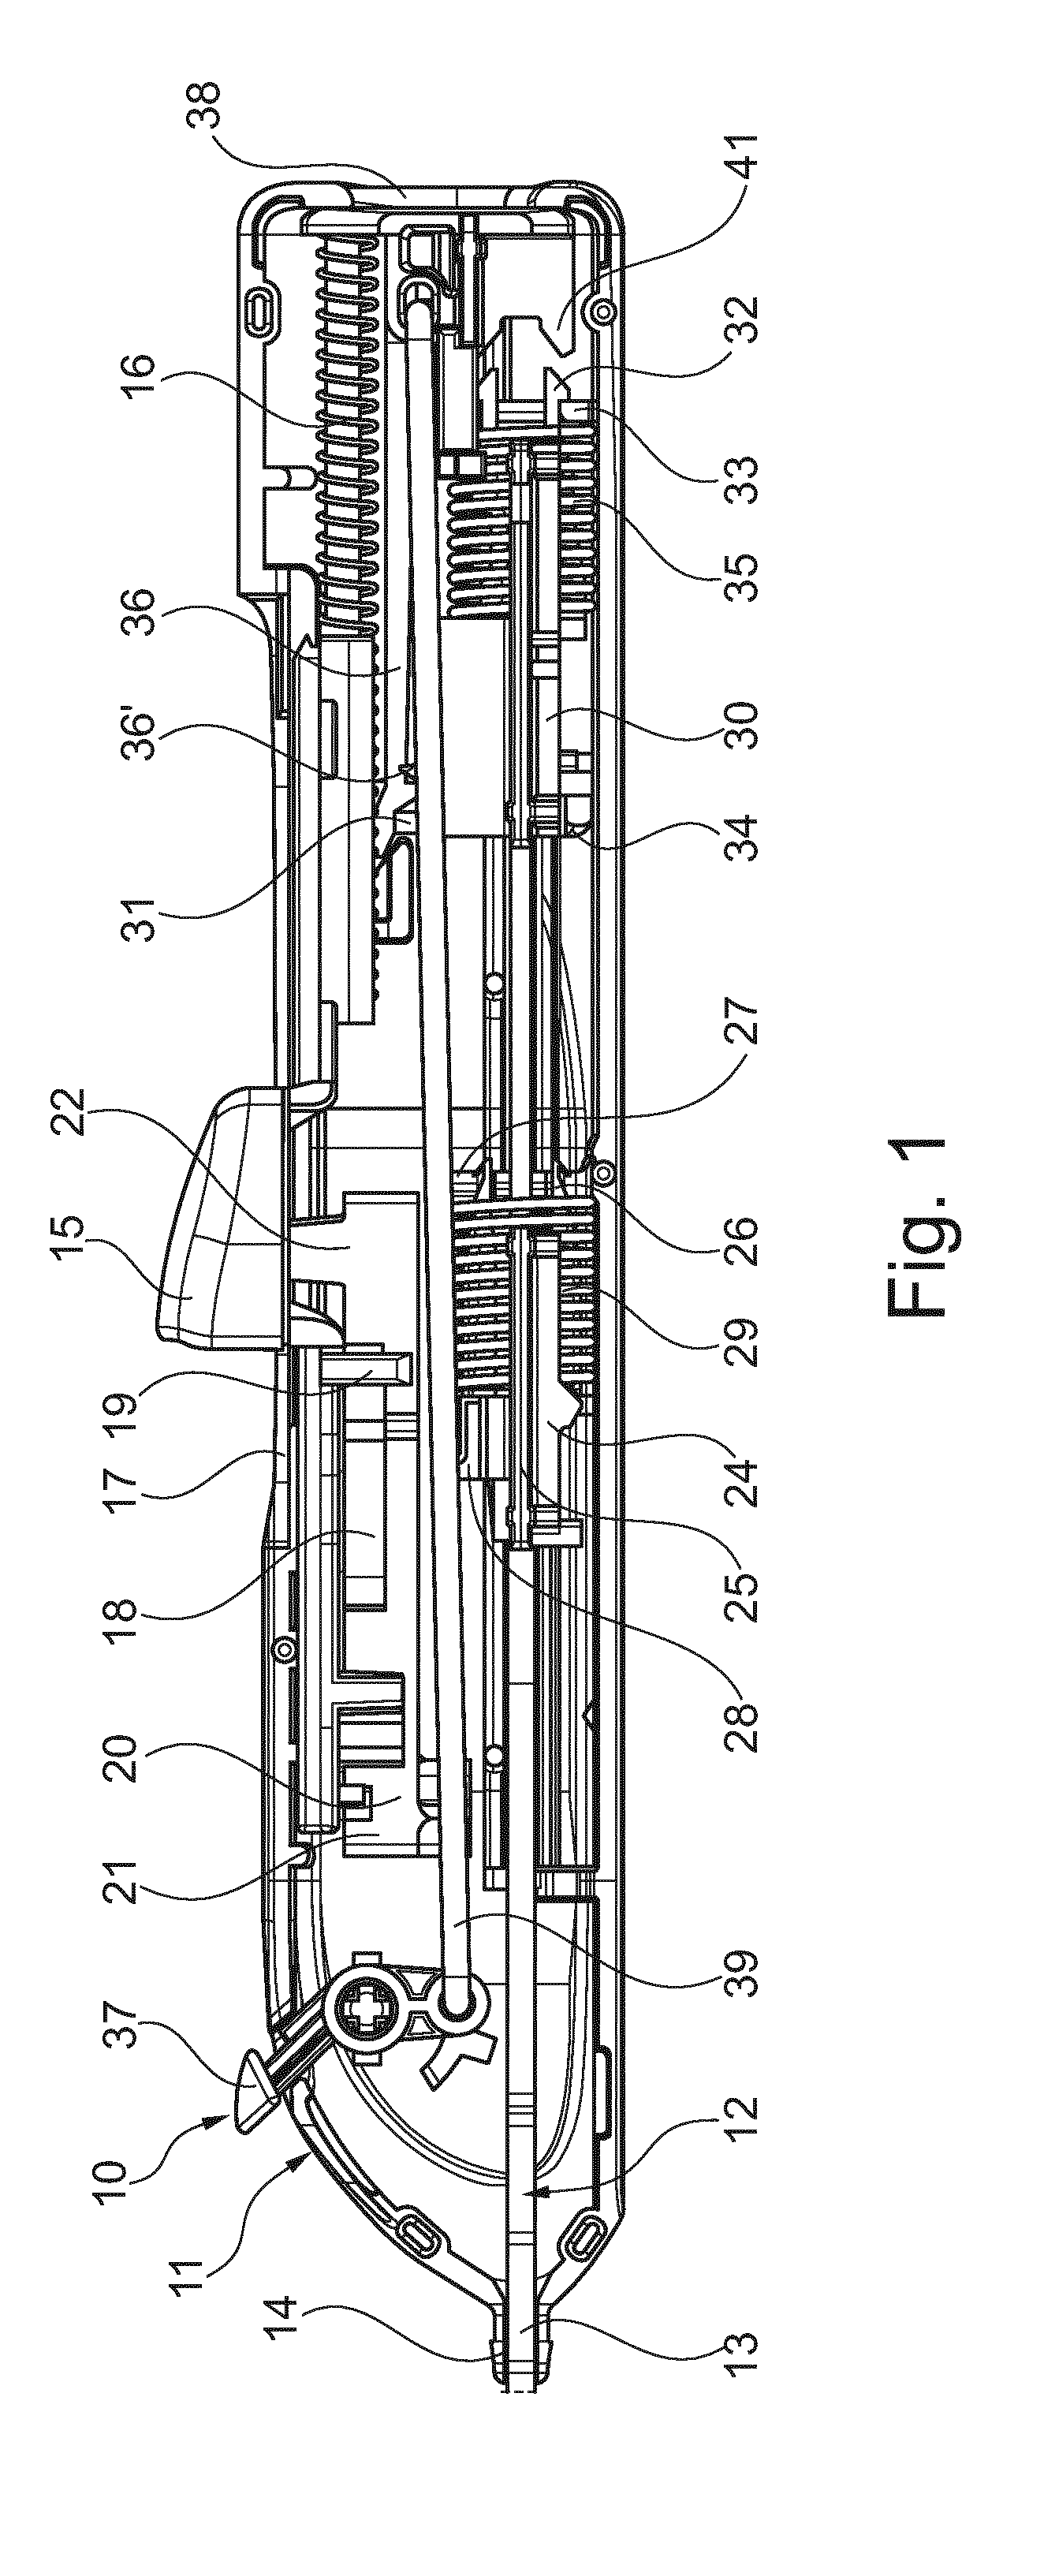 Device for Taking at Least One Sample of Tissue